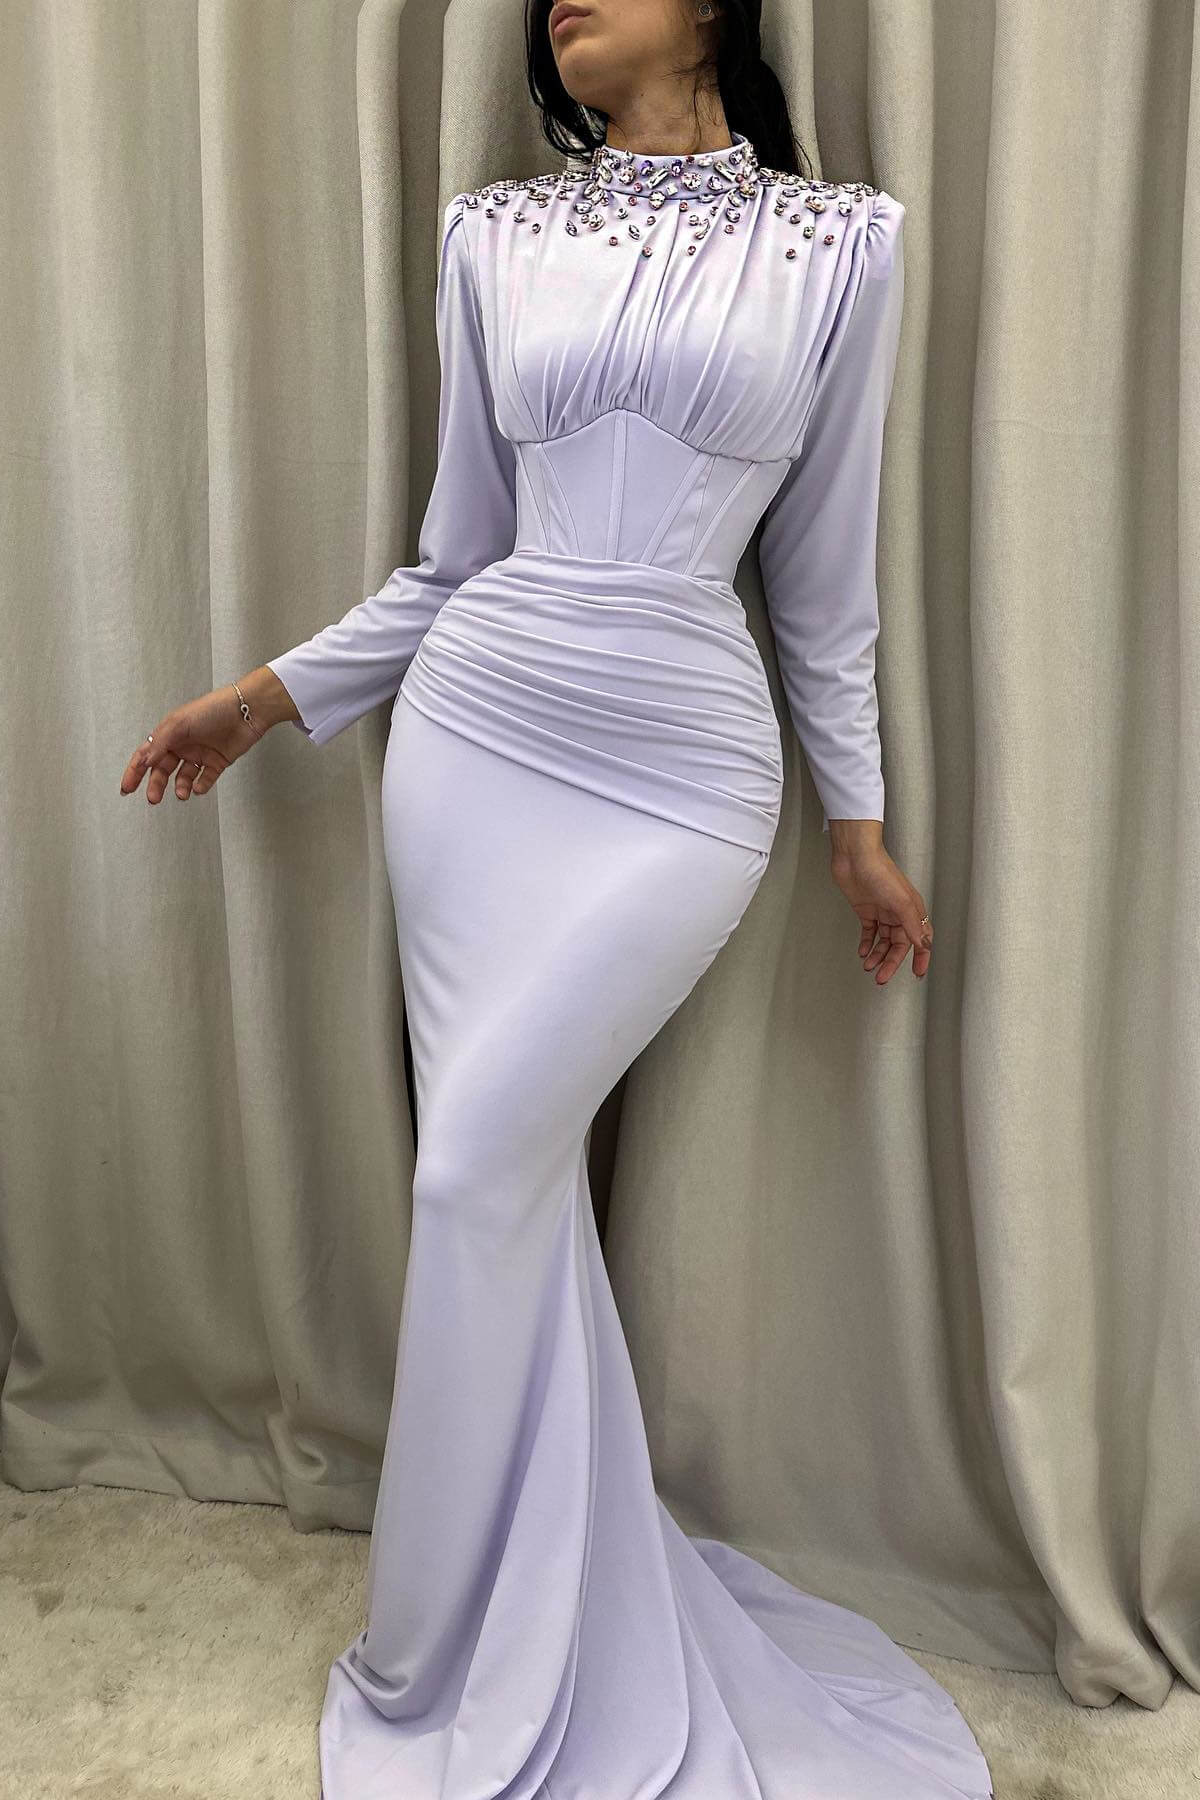 Chic Lilac High Neck Long Sleeves Mermaid Evening Gown With Beads Online - lulusllly